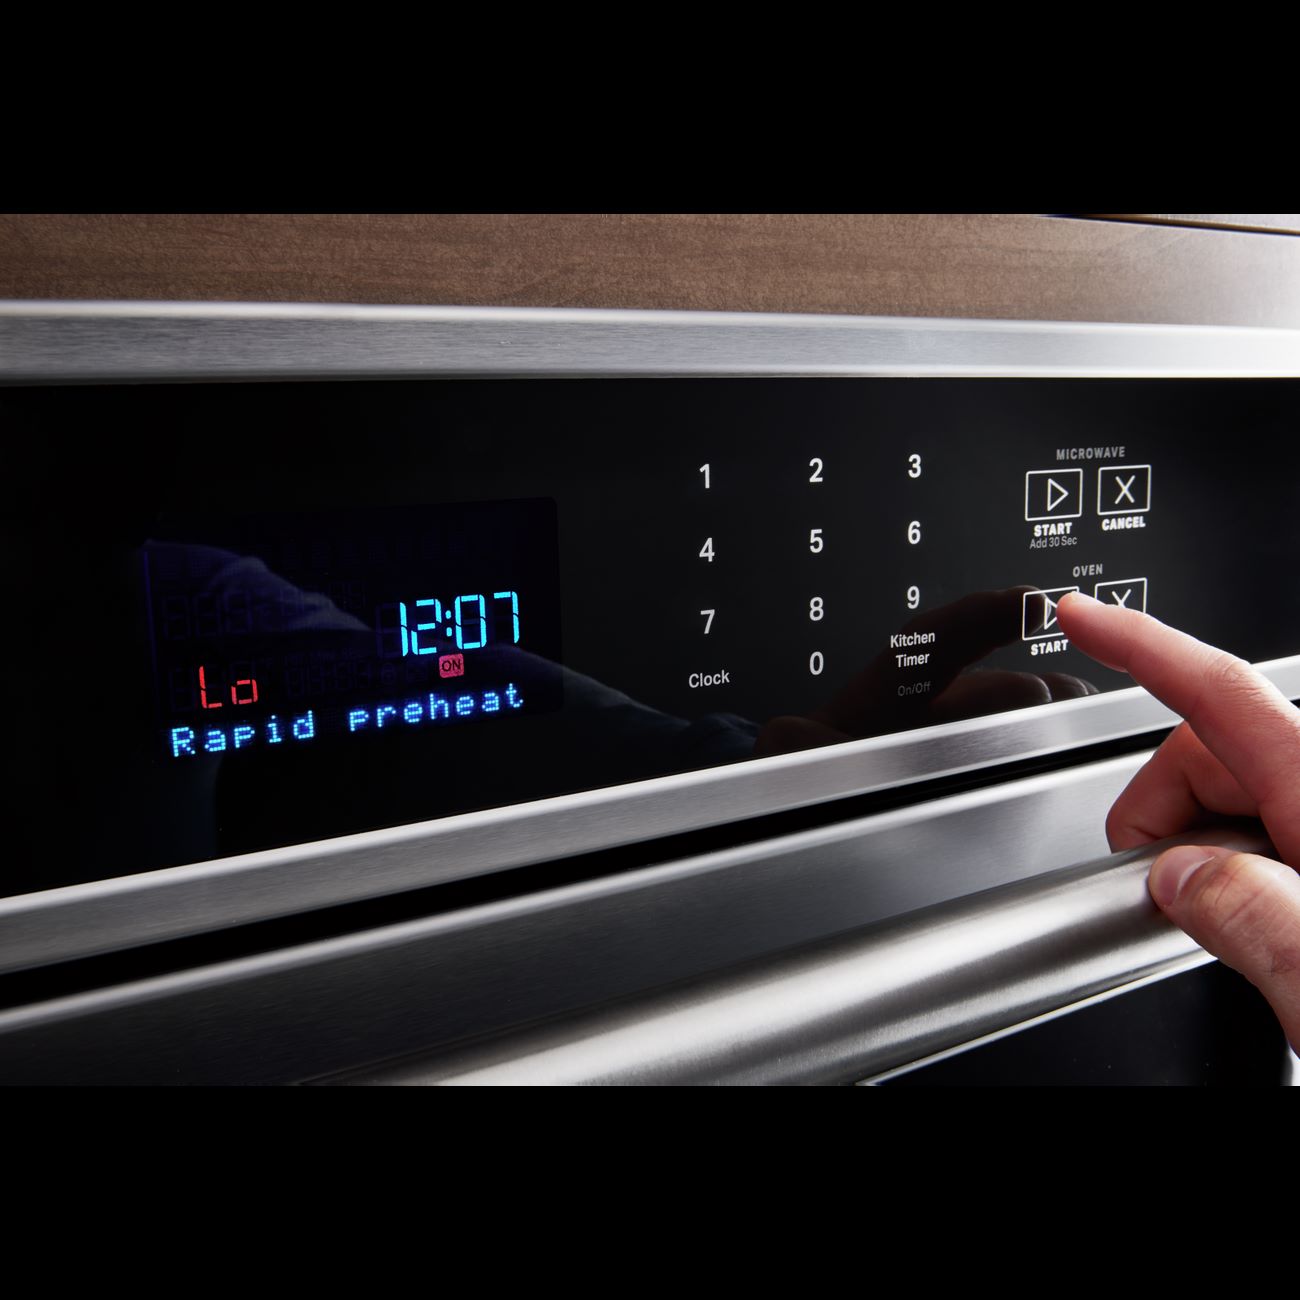 How To Fix The Error Code F8-E4 For Maytag Oven